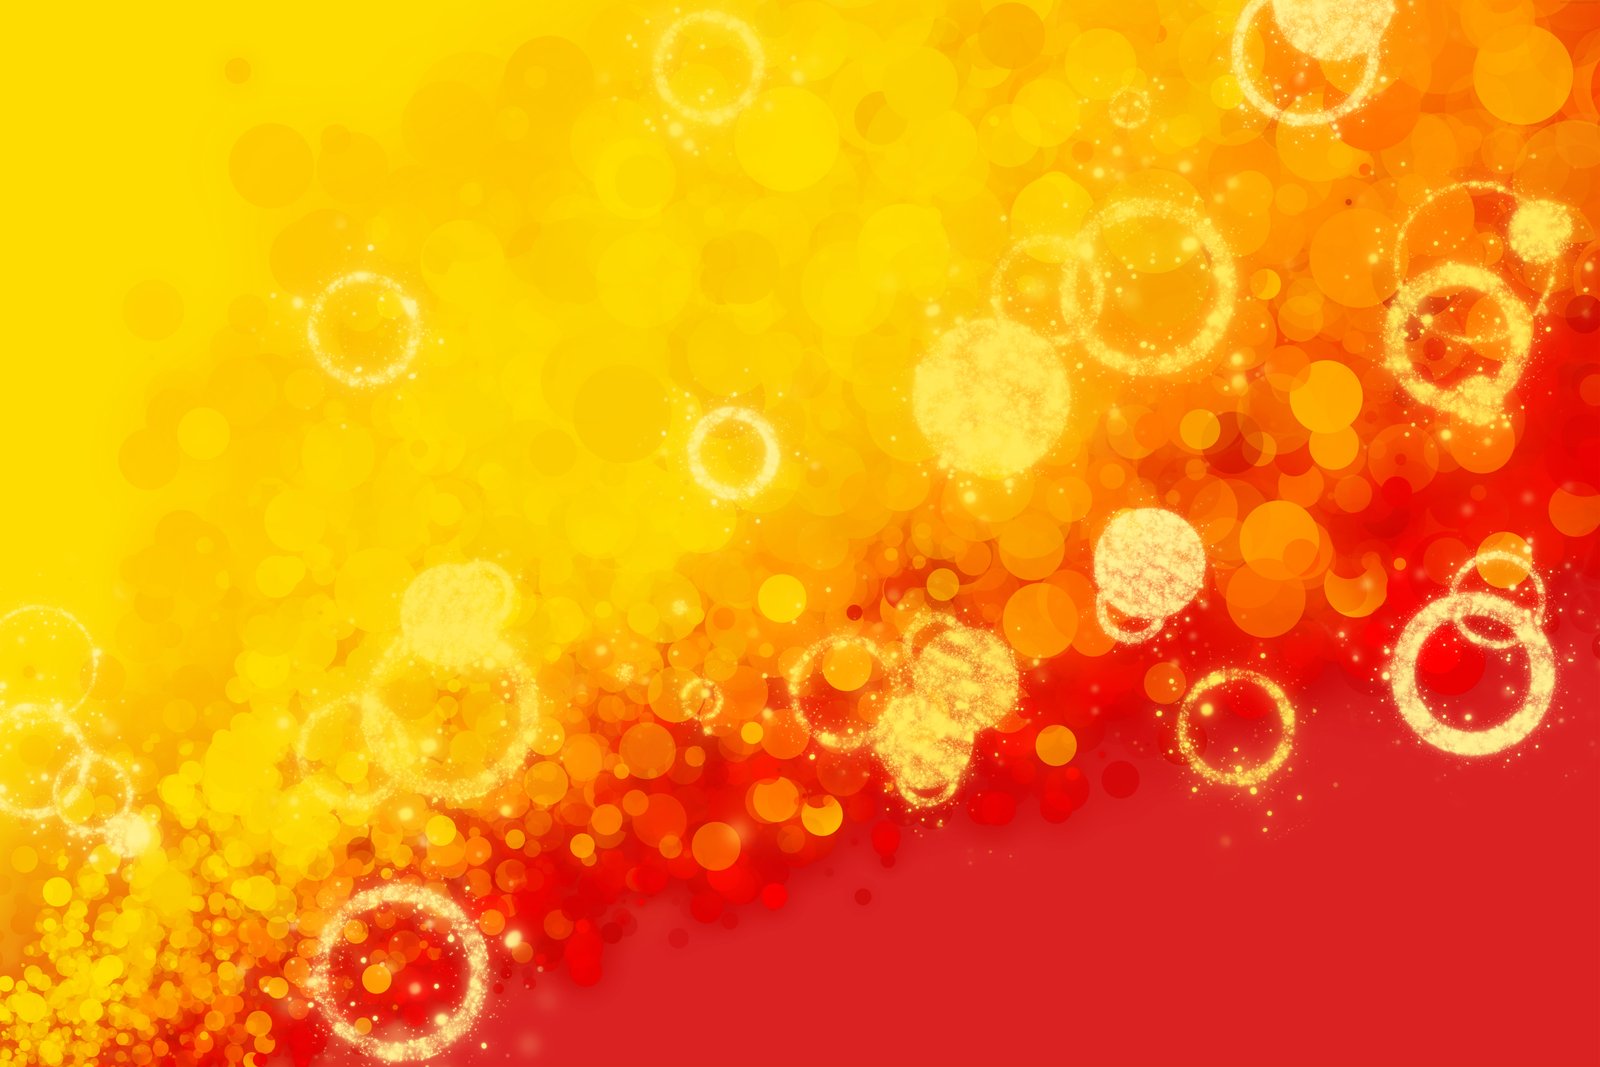 Red and yellow bubbles background - PSDgraphics